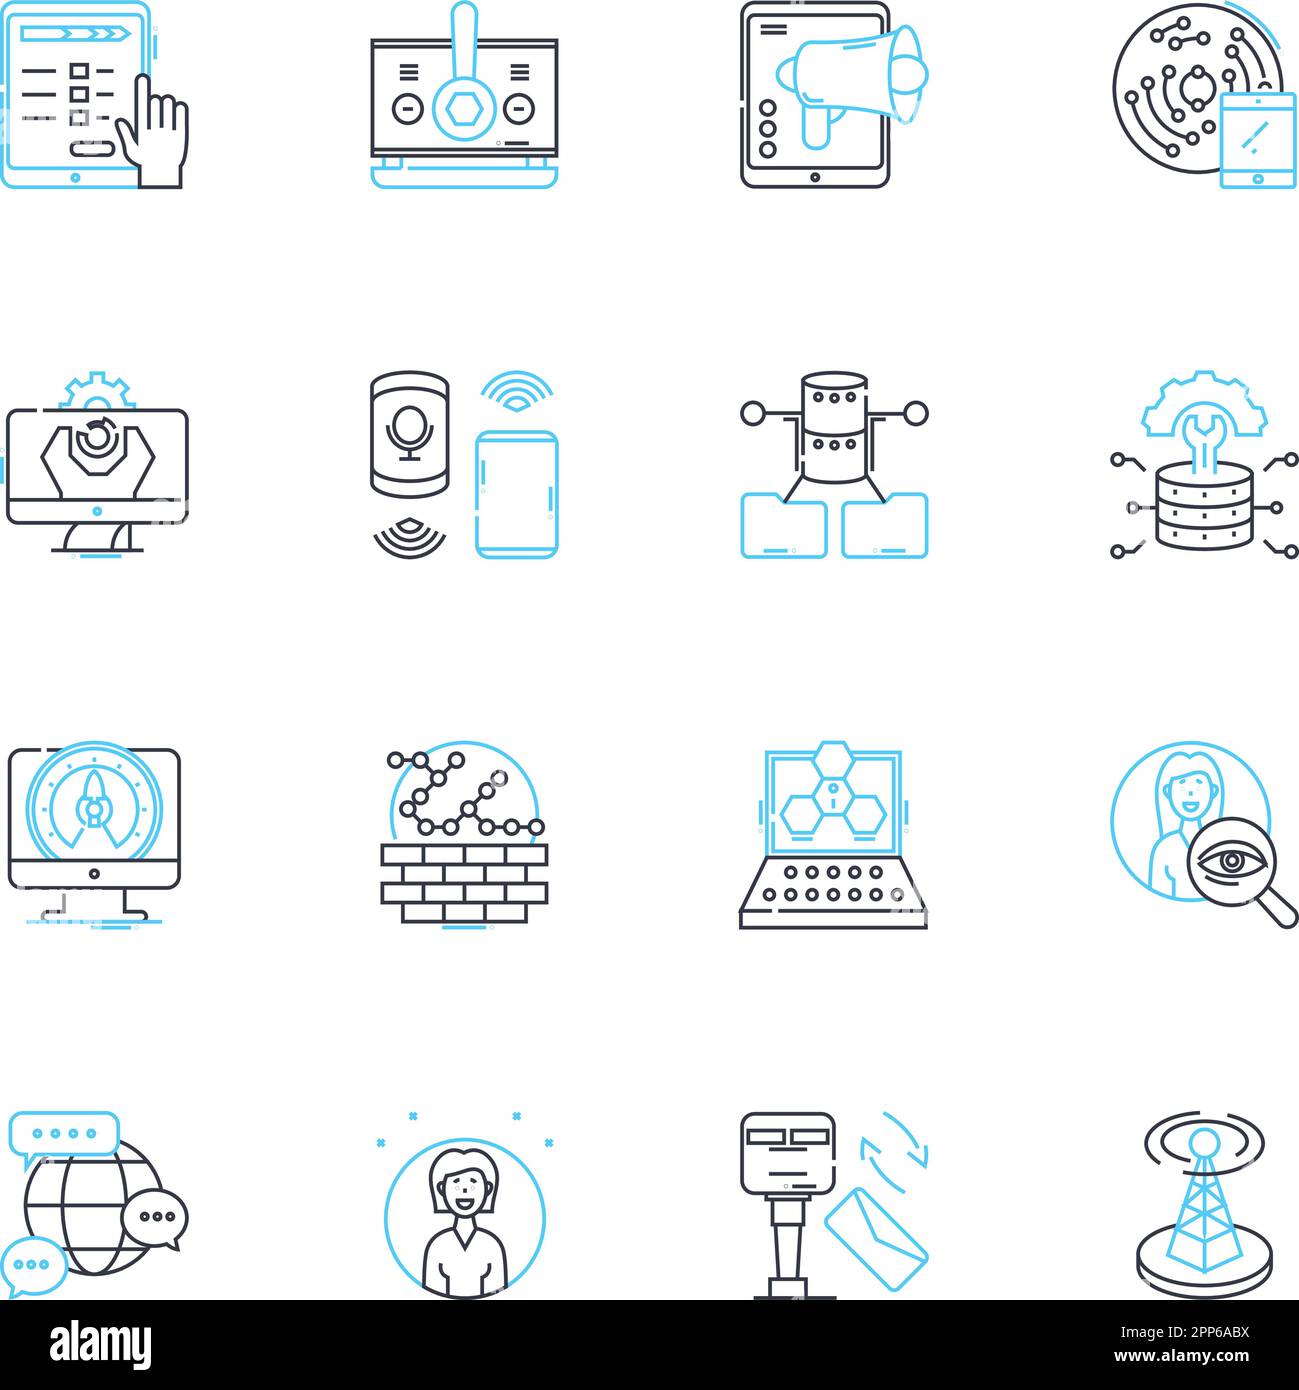 Online communication linear icons set. Instantaneous, Efficient, Streamlined, Accurate, Dynamic, Flexible, Secure line vector and concept signs Stock Vector